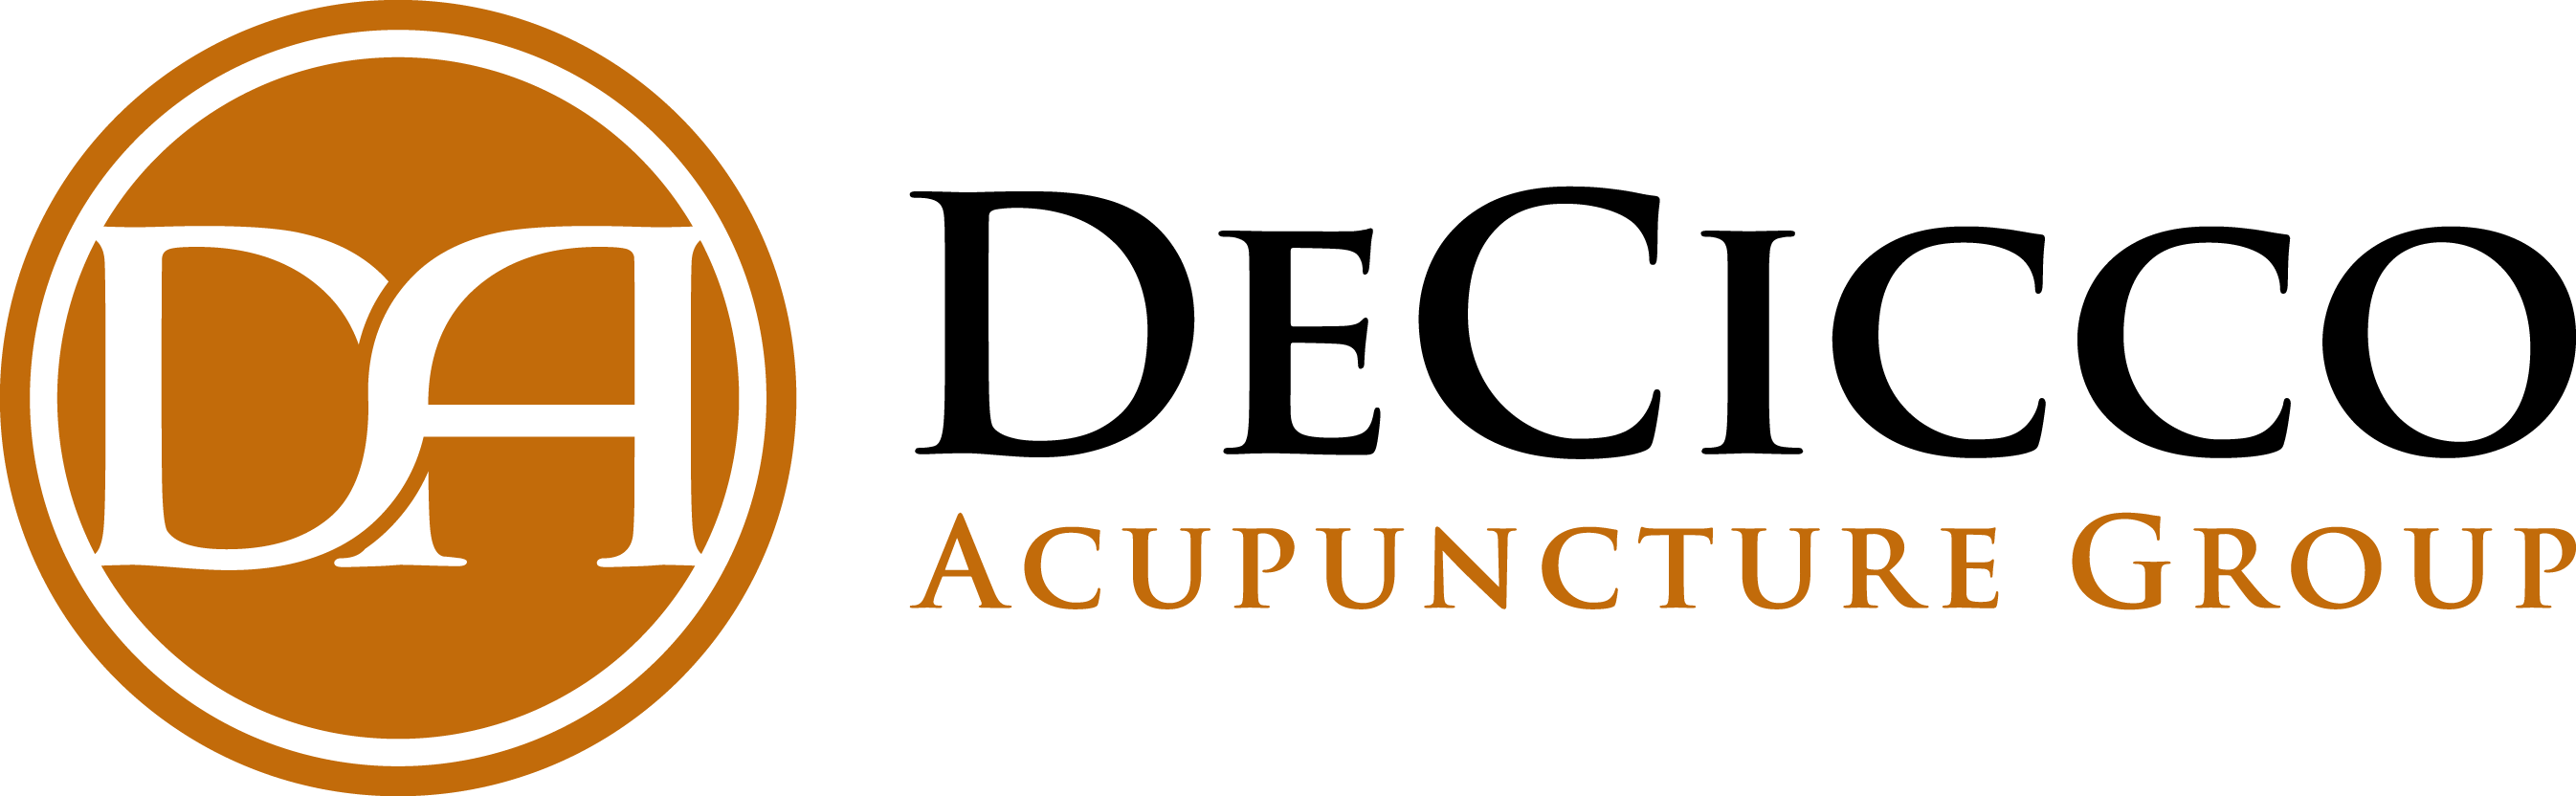 Decicco Acupuncture Group